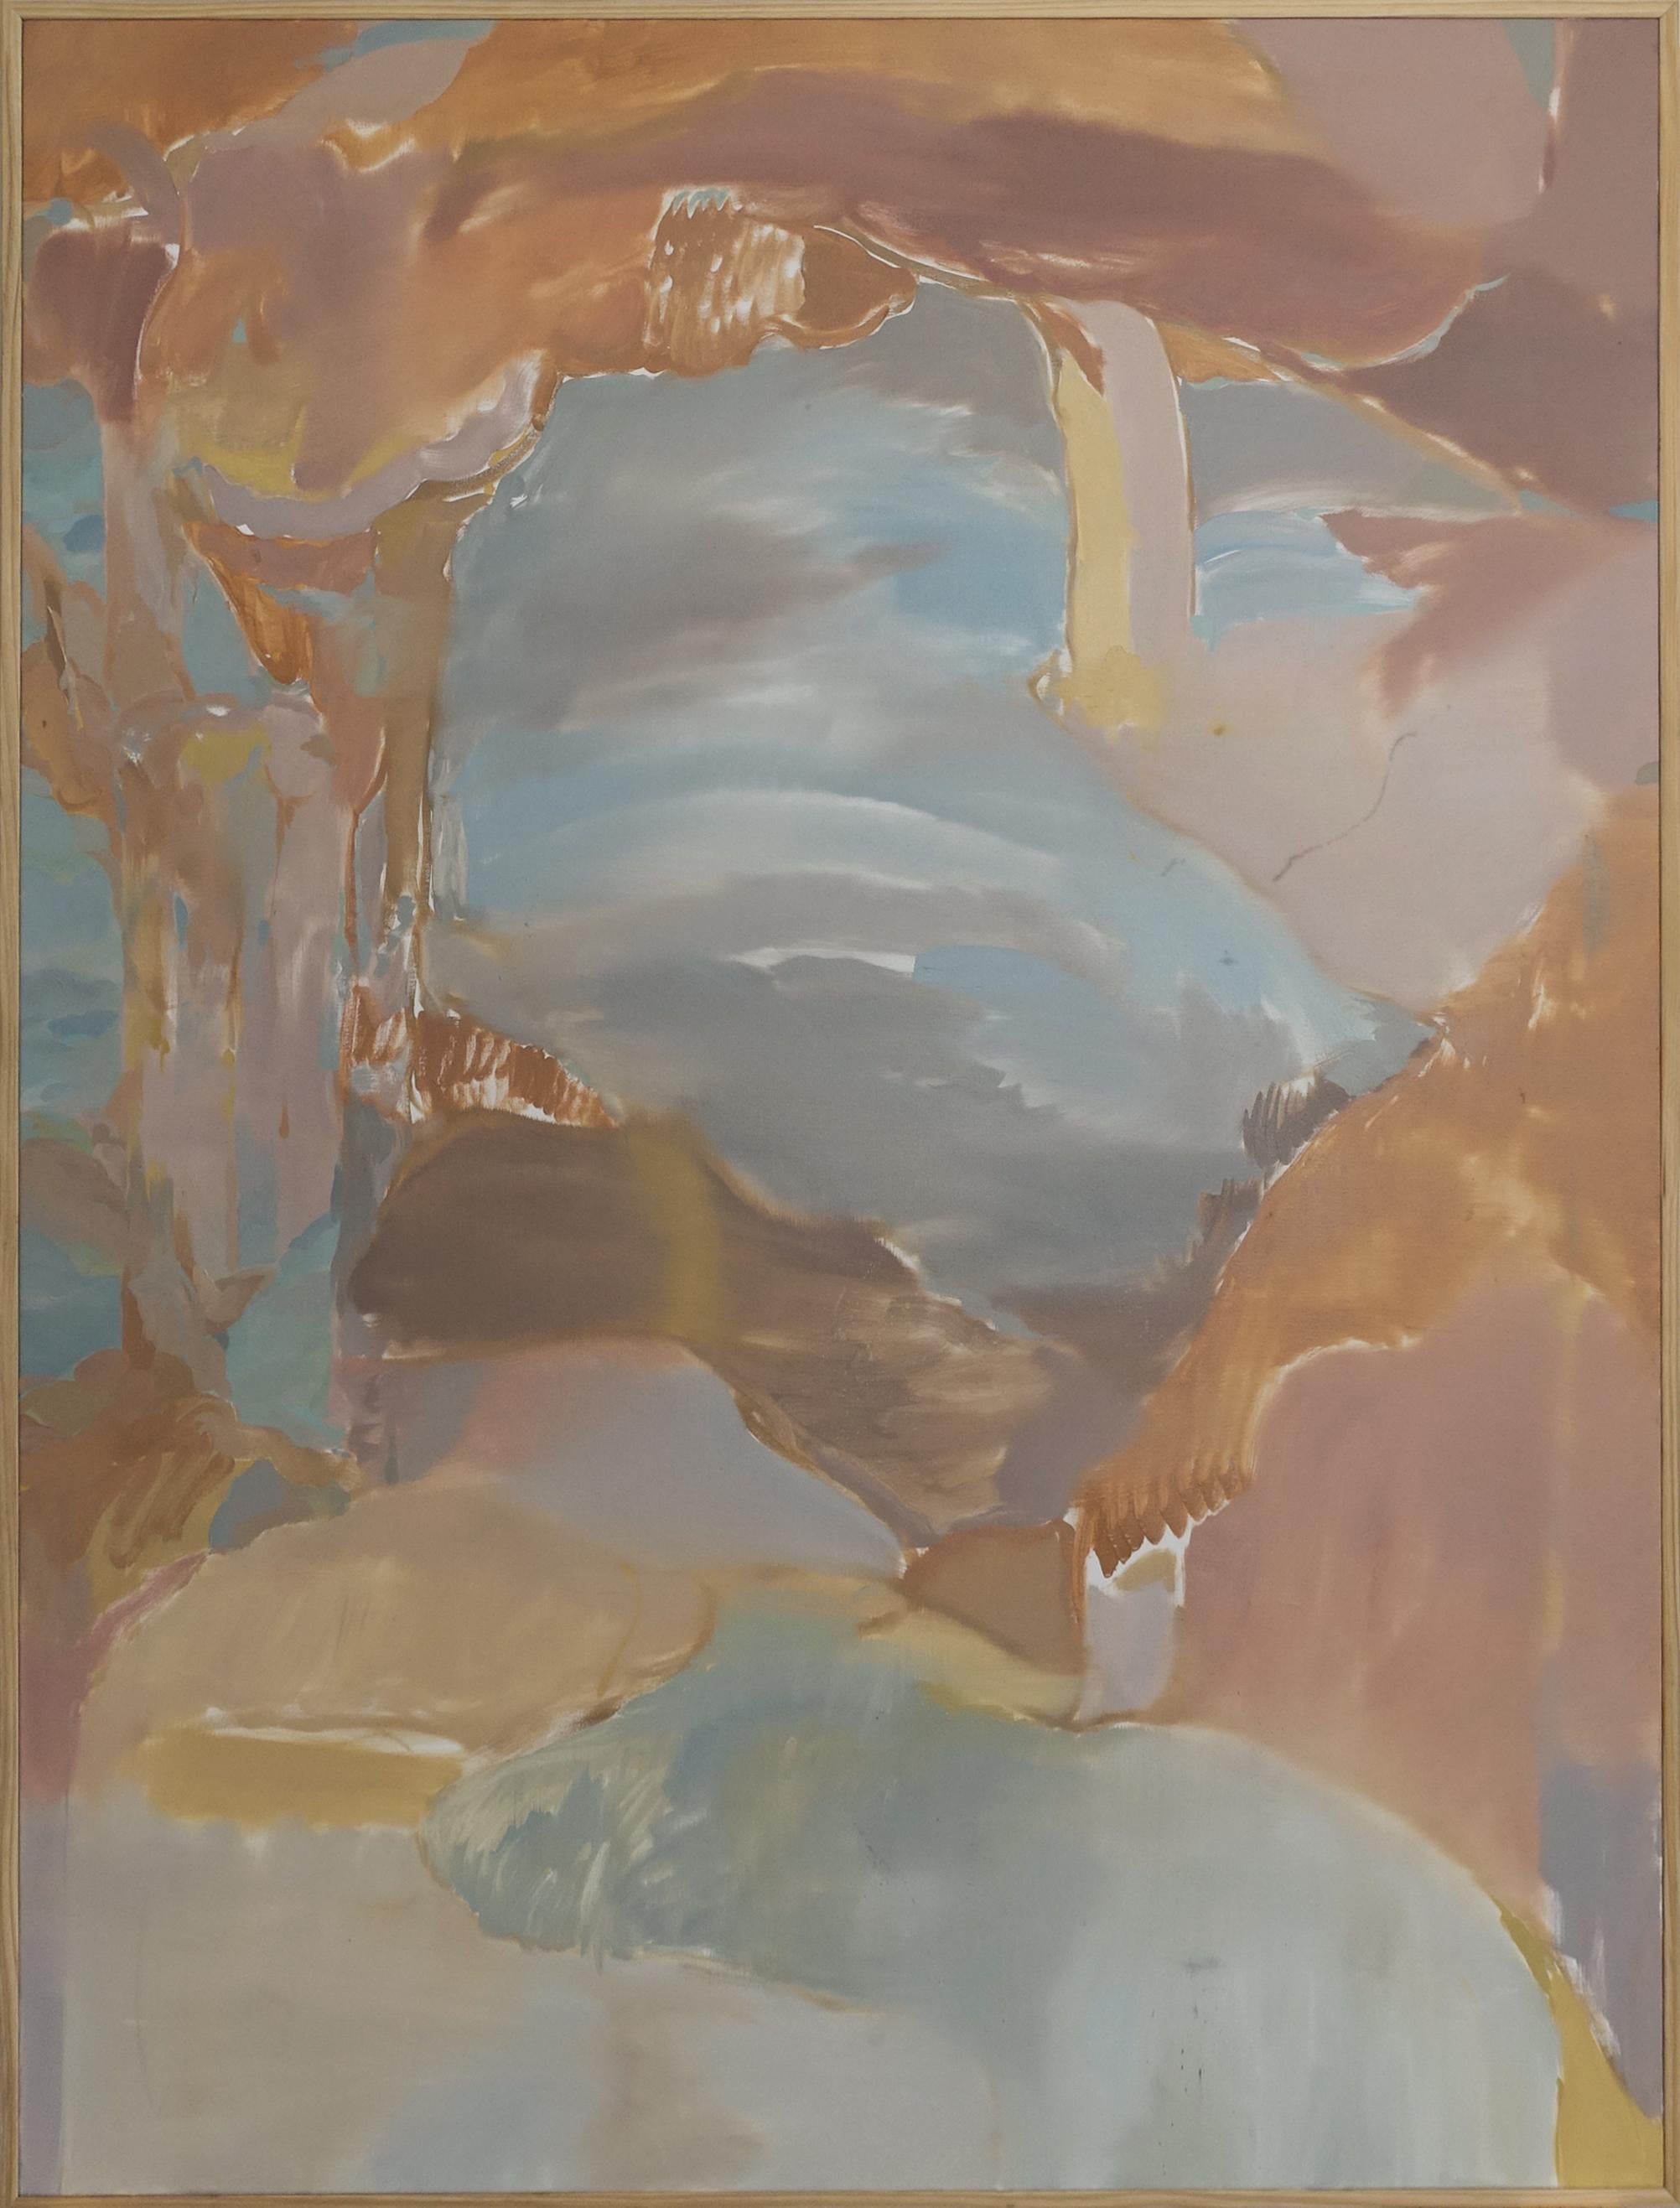 "Canyon" a large abstract landscape painting, oil on canvas by Skylar Hughes. Using a palette of various muted earth tones and light blue hues. Skylar's interest in painting as the representation of our relationship to and experience of nature